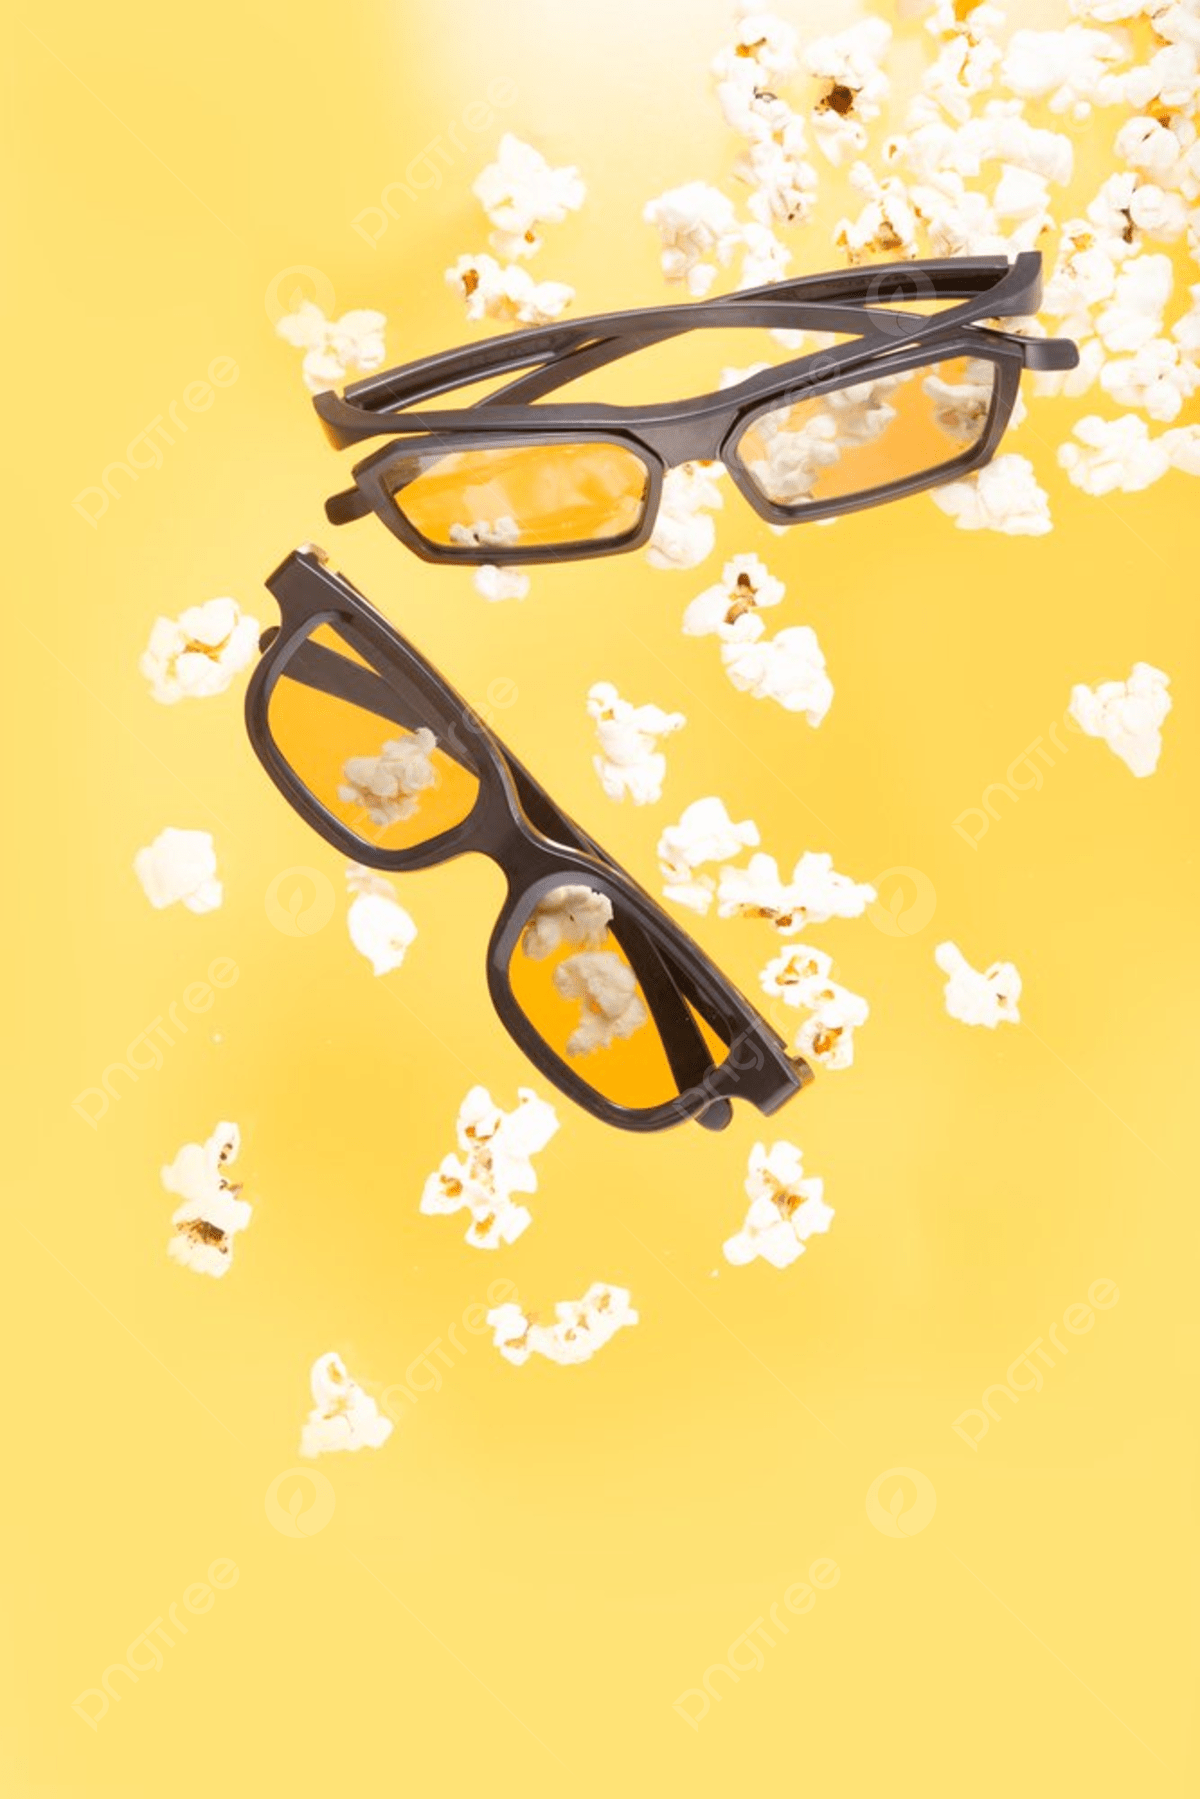 Popcorn And Two Pairs Of 3D Glasses Over Yellow Background Photo And Picture For Free Download